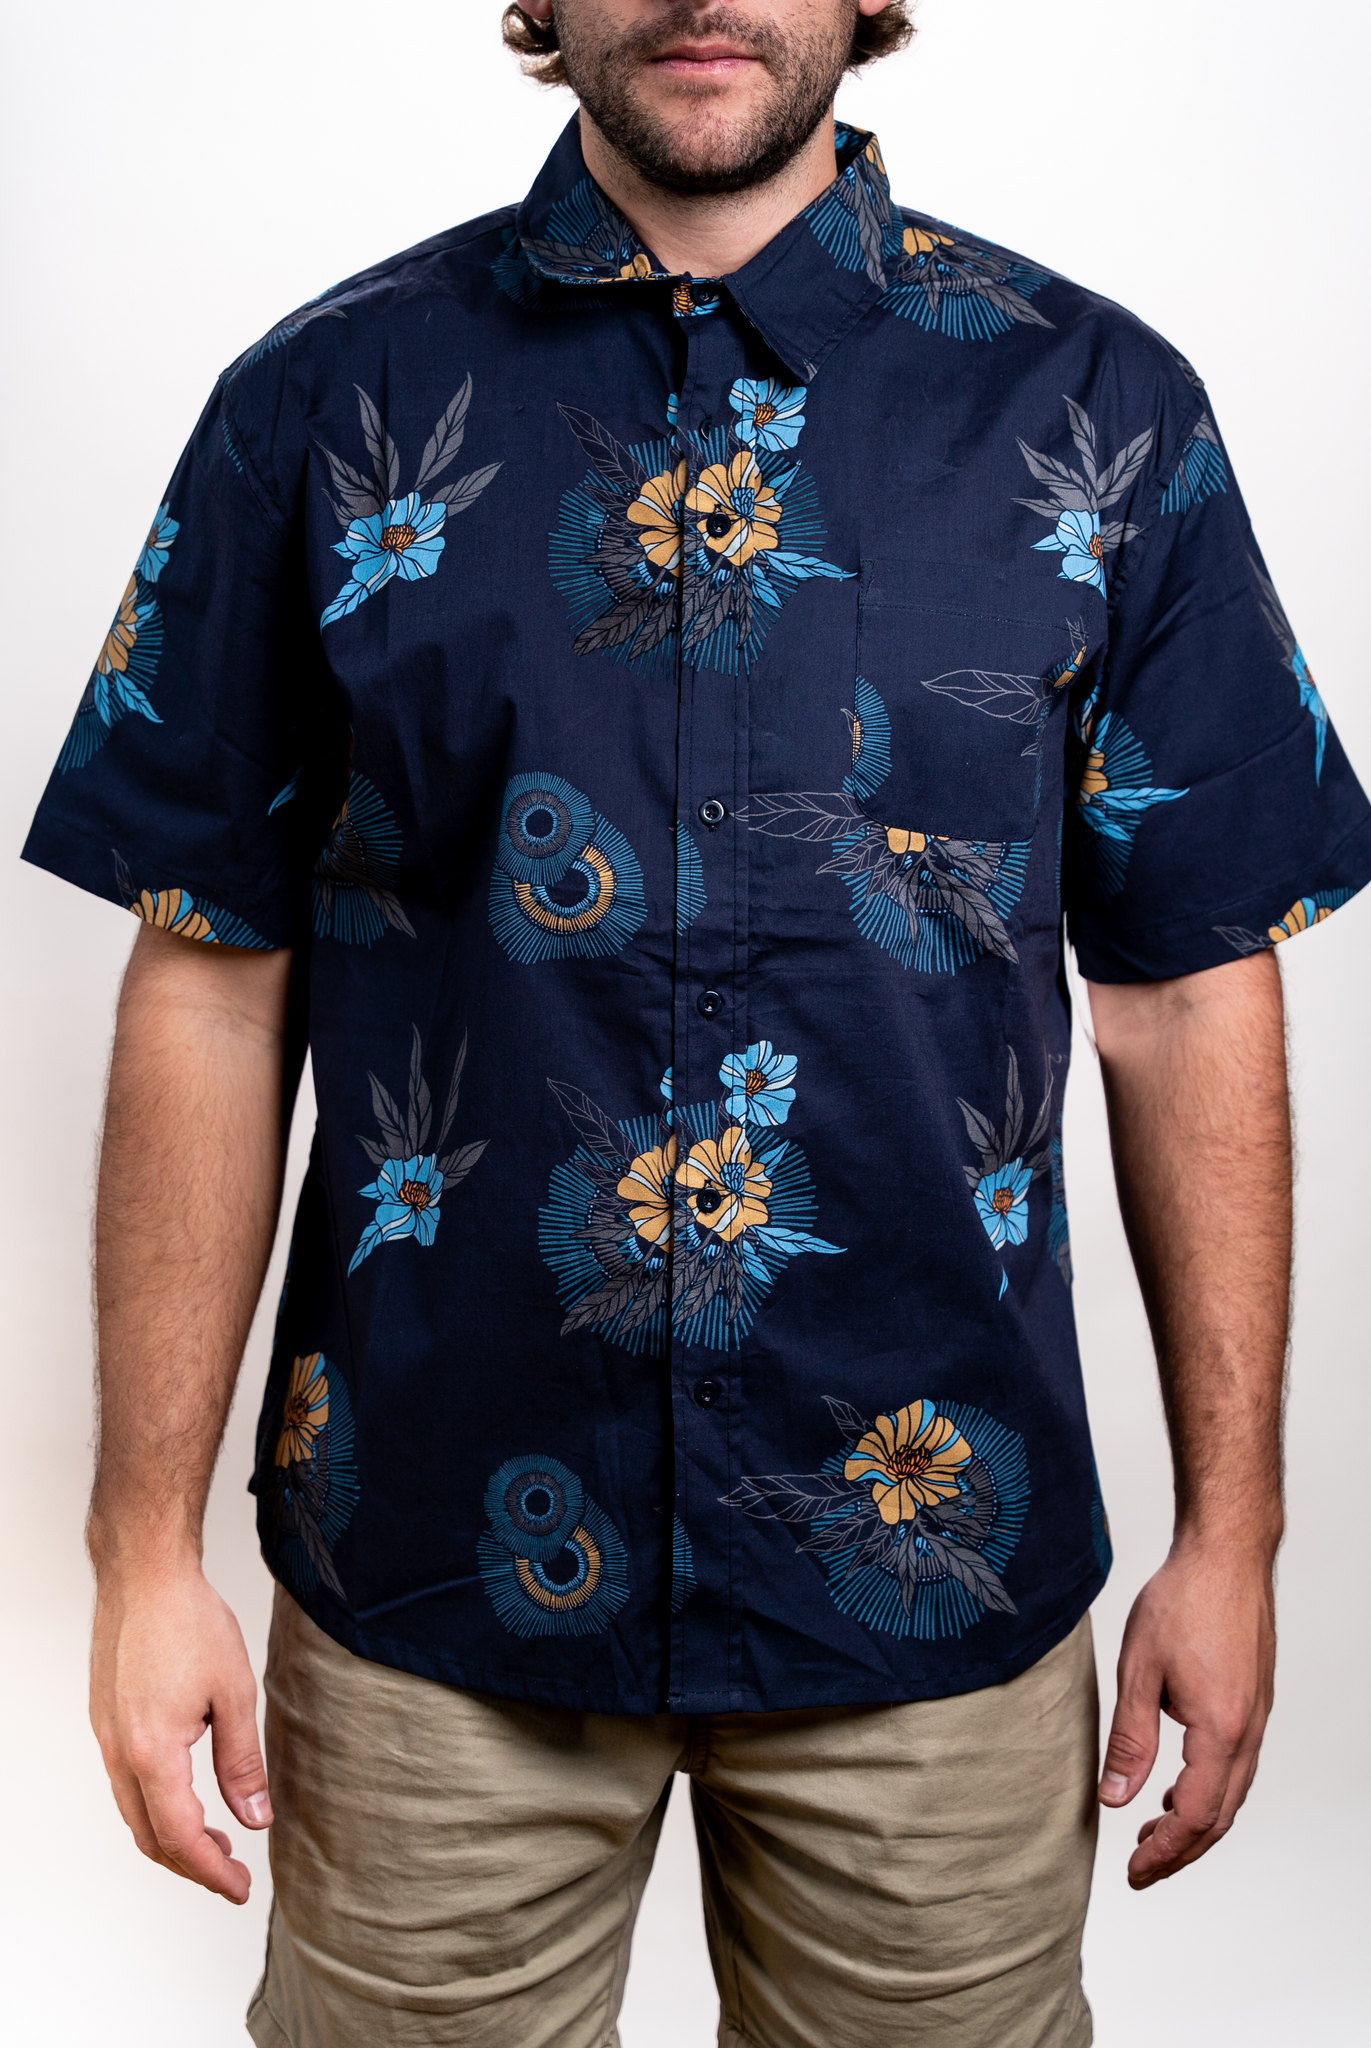 STSSW47 - Aloha Vibes SS Woven Blue / S Shirts & Tops